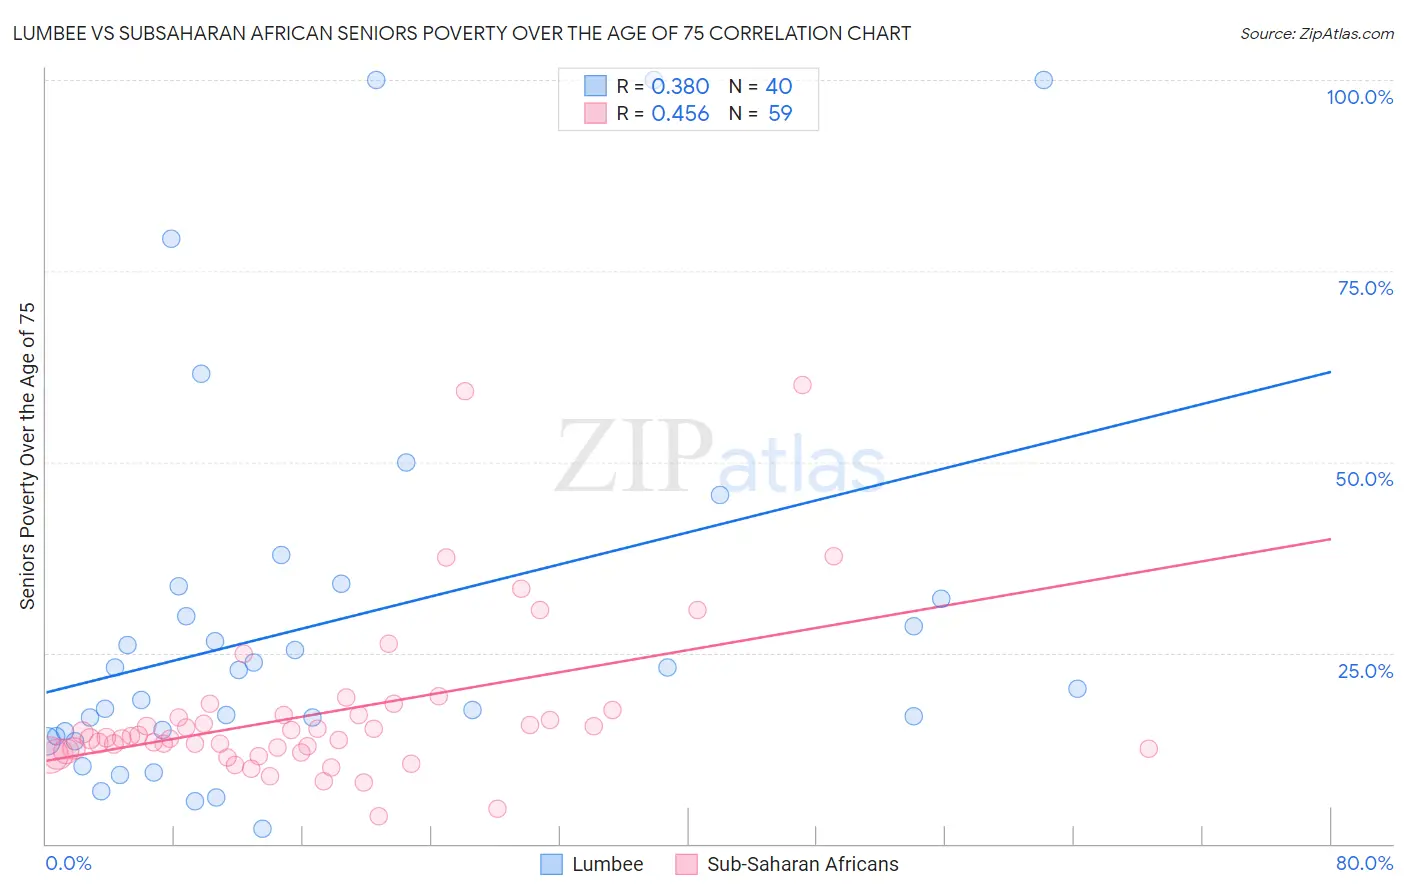 Lumbee vs Subsaharan African Seniors Poverty Over the Age of 75